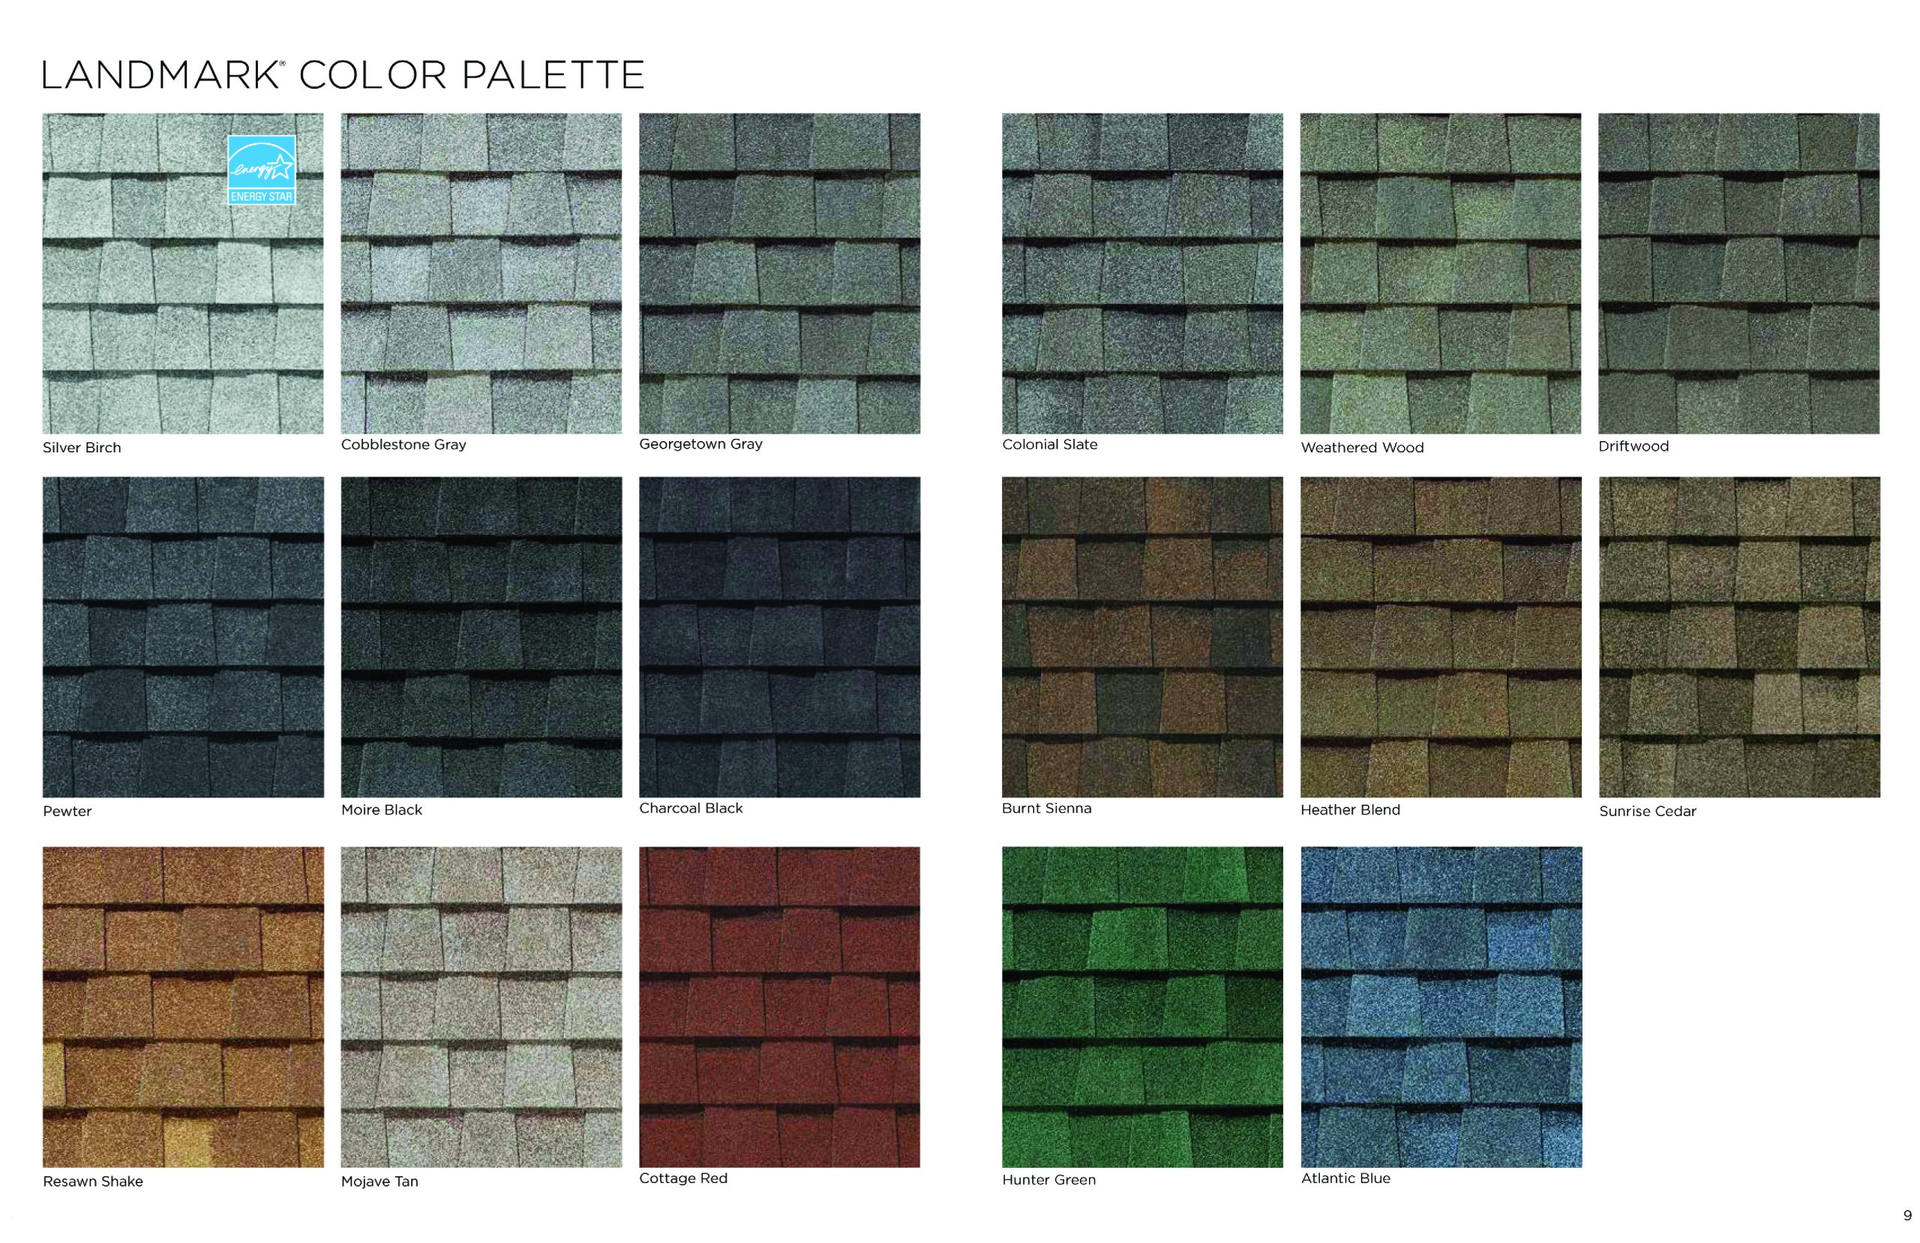 a brochure for landmark color palette shows different shades of shingles